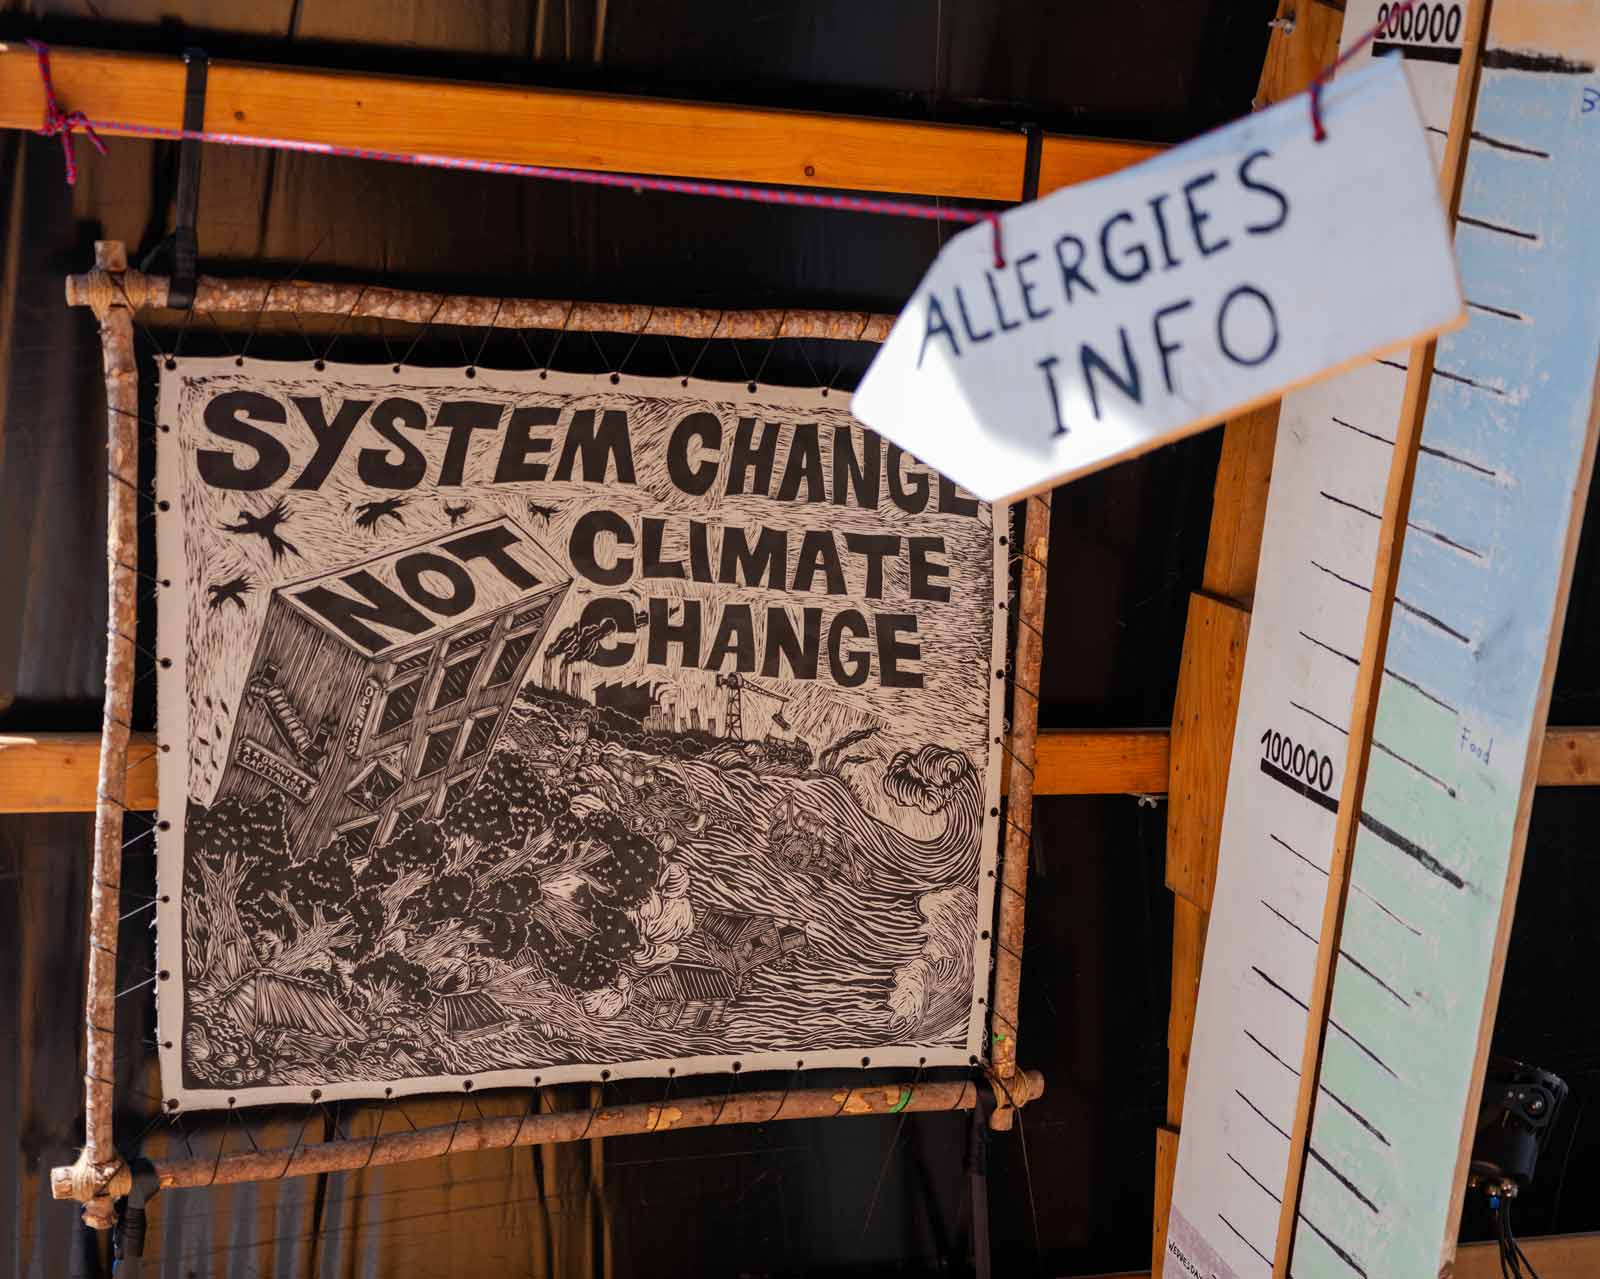 Affiche "System change, not climate change".